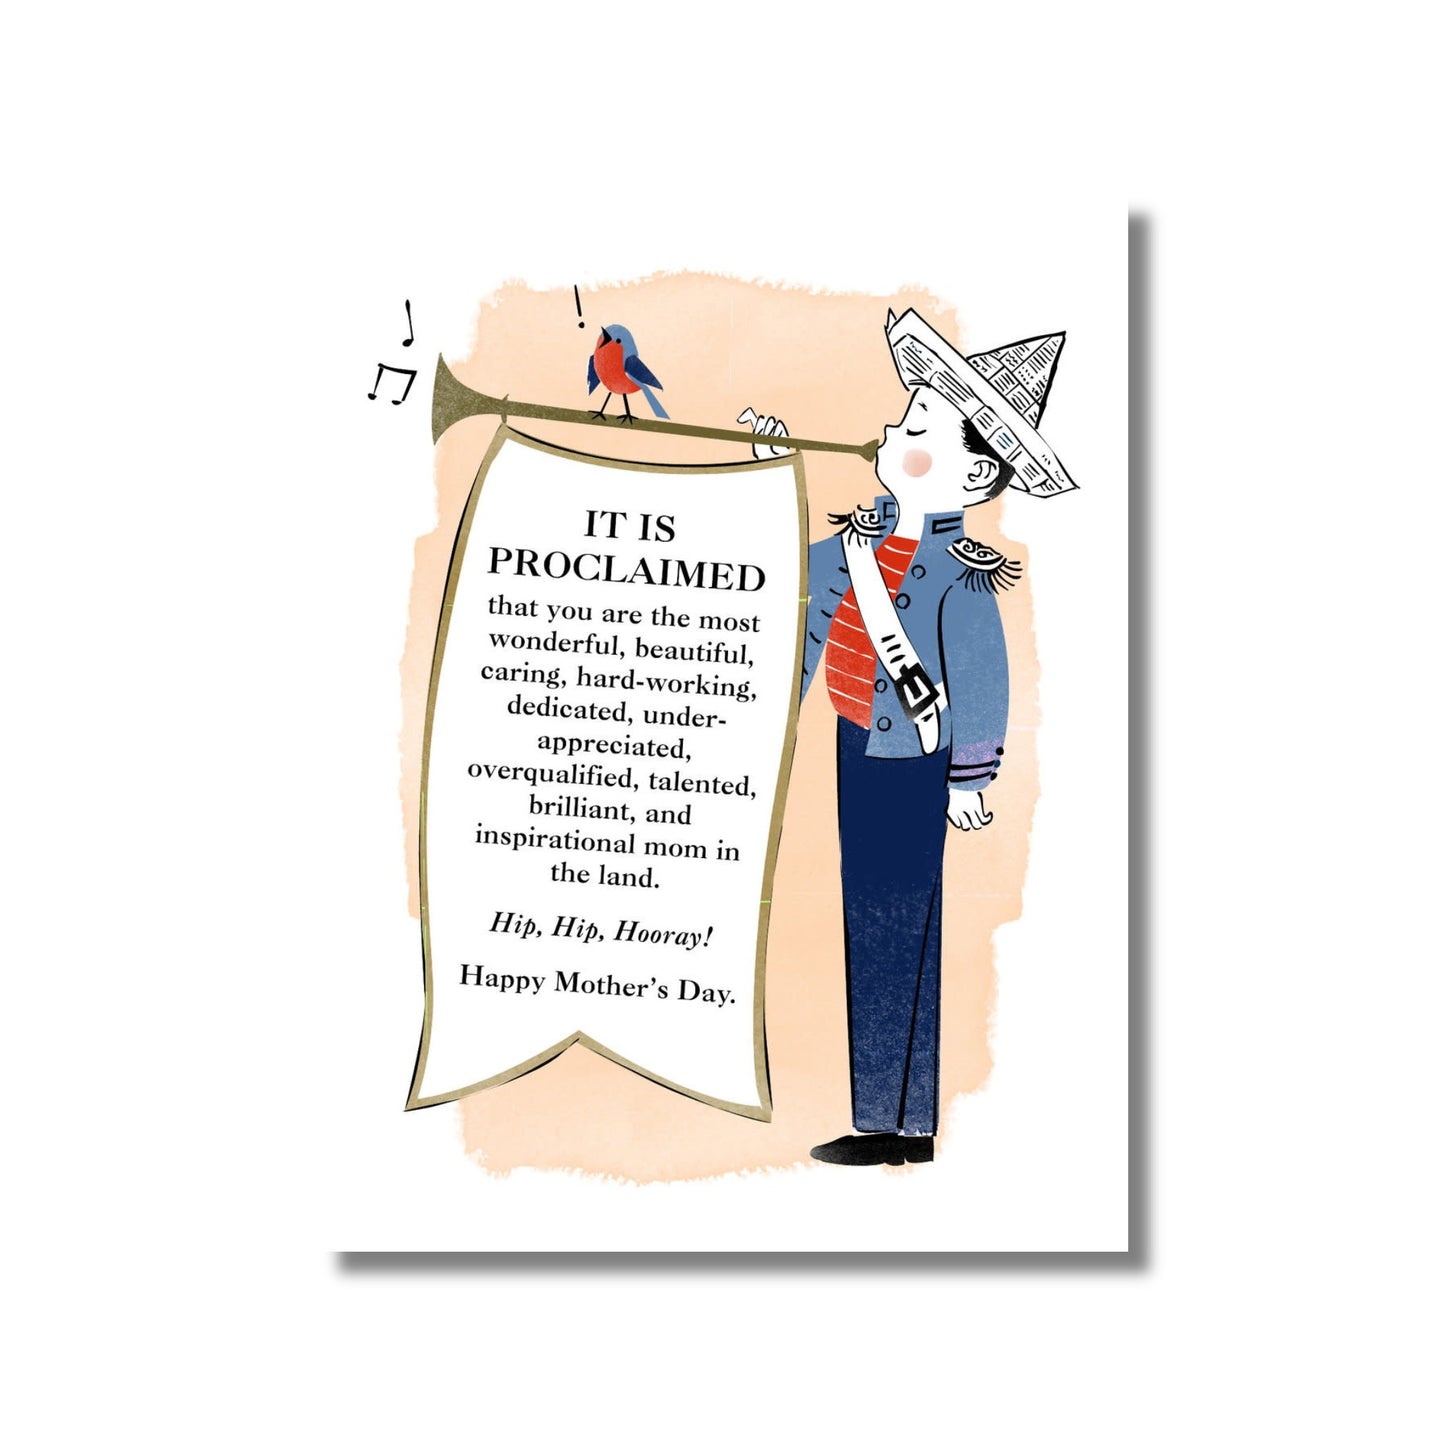 Mother’s Day Card — Trumpeting Proclamation